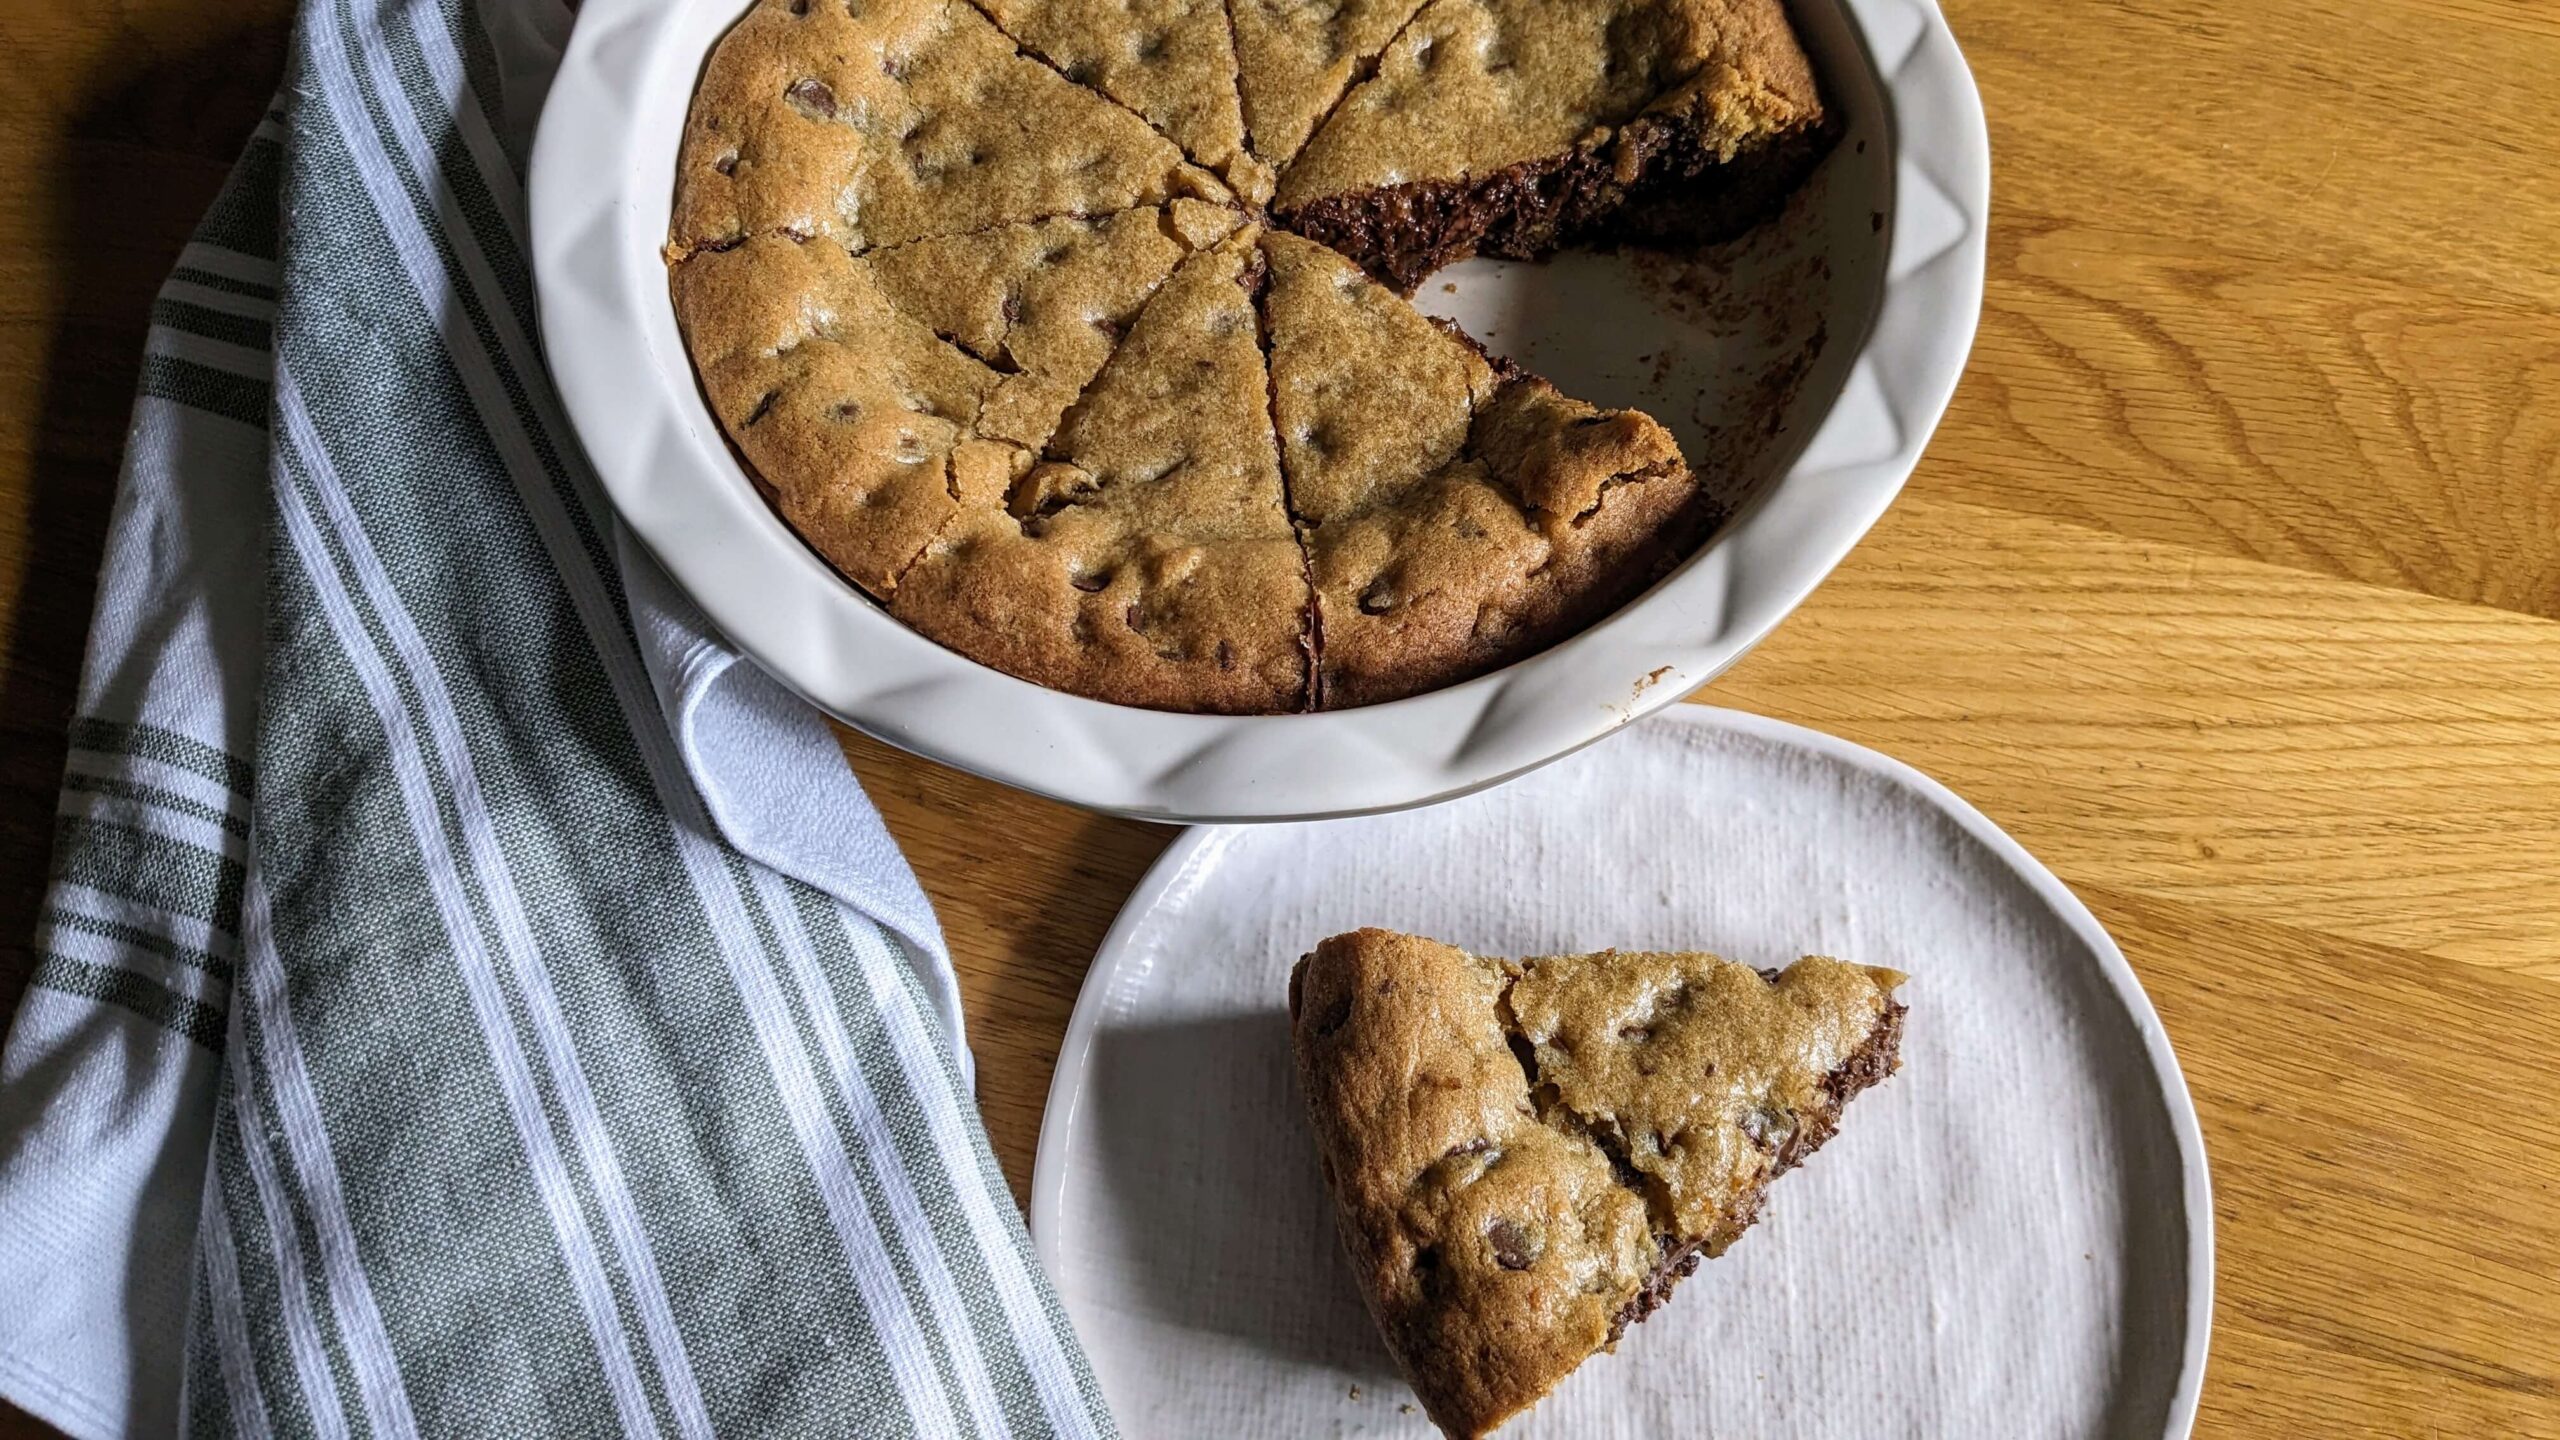 a pie plate holding chocolate chip cookie pie with one slice taken out and placed on a white plate next to a green and white towel